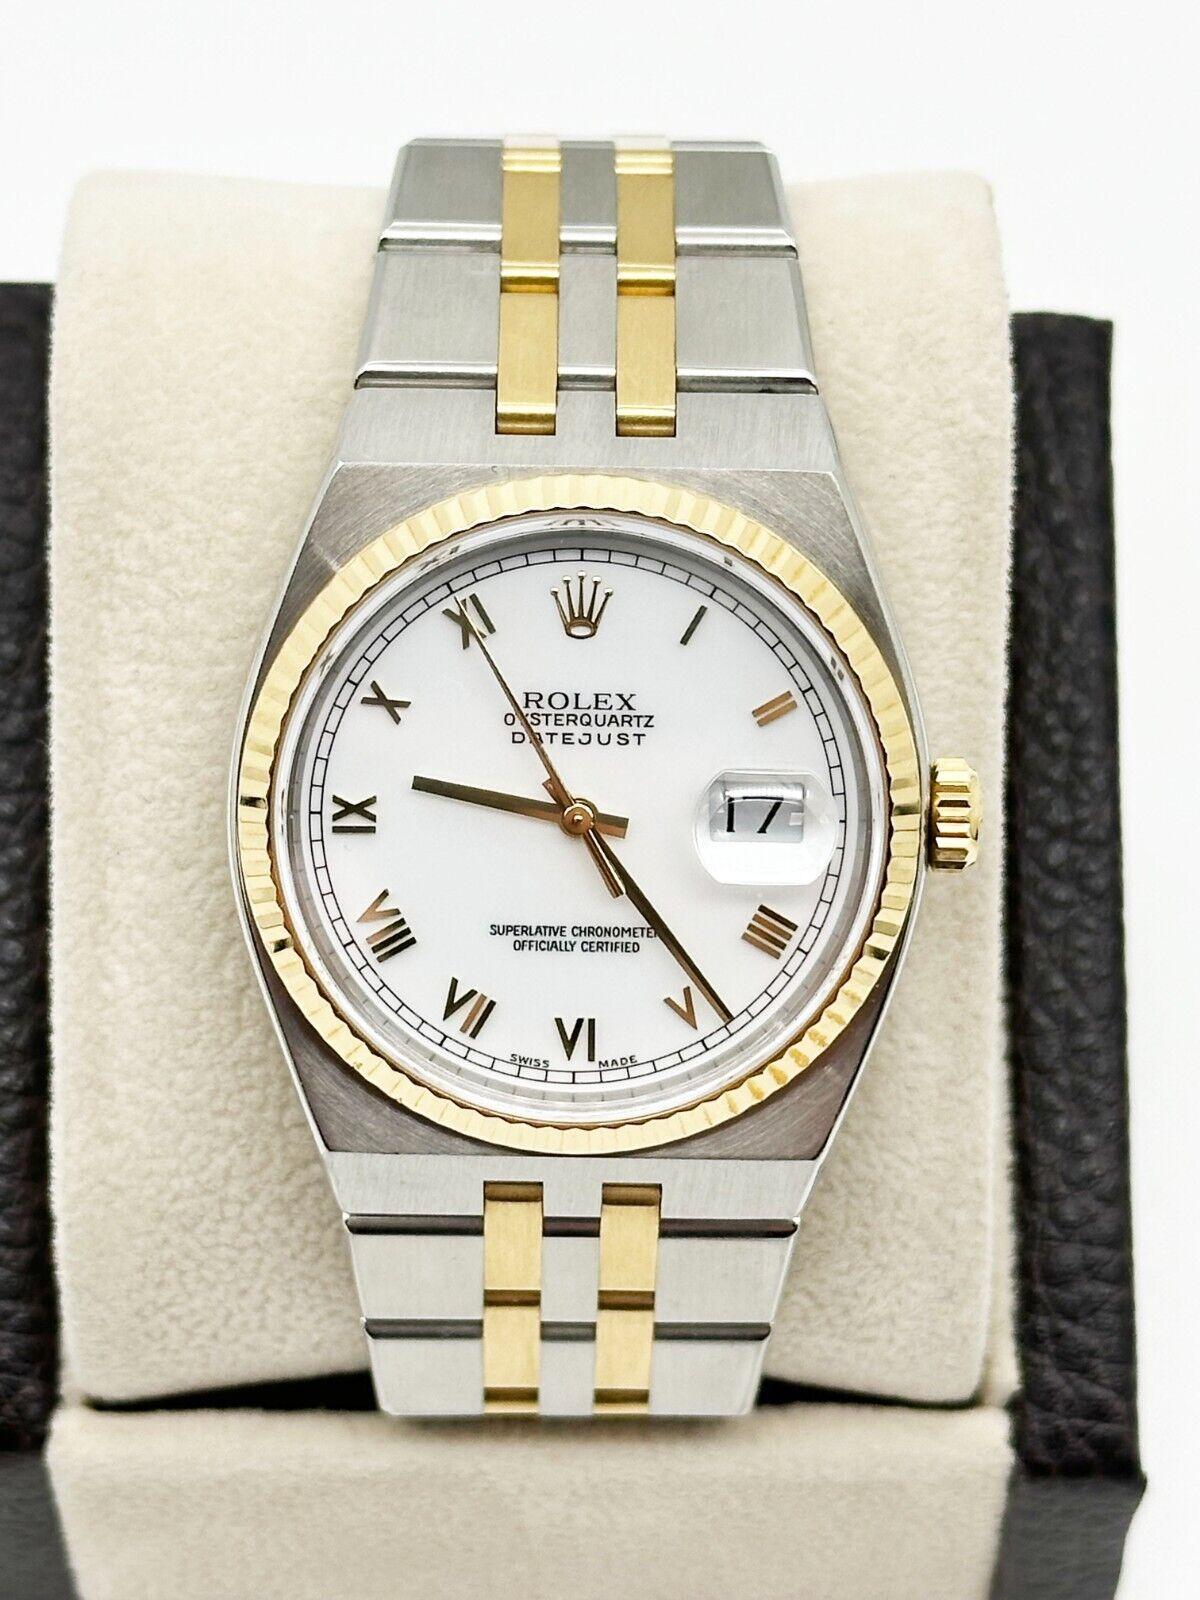 Rolex 17013 Datejust Oysterquartz White Dial 18K Yellow Gold Stainless Steel In Excellent Condition In San Diego, CA